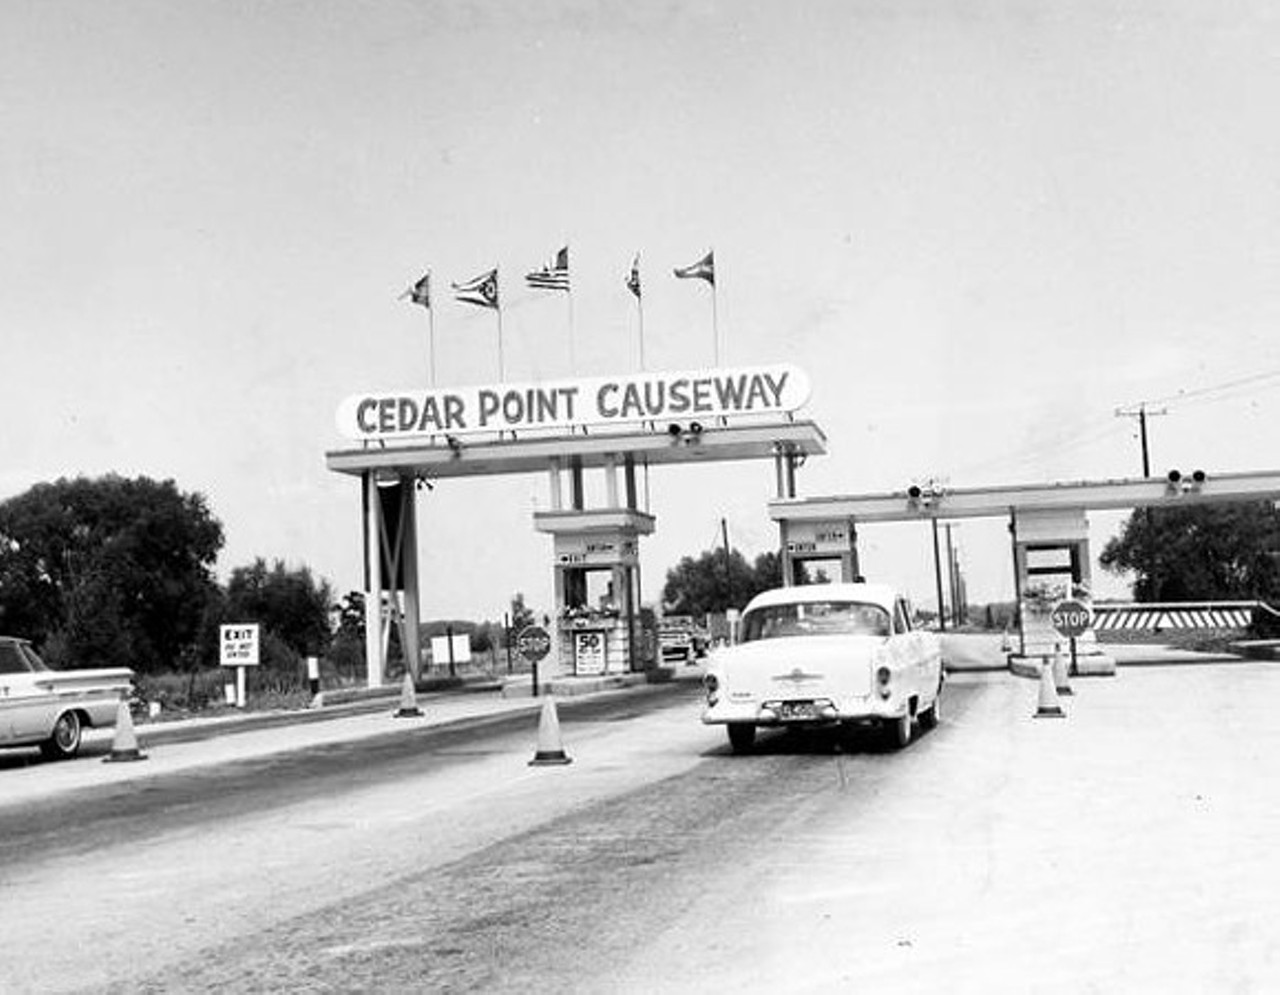 The Cedar Point Causeway (Photo via Cleveland Memory Project)